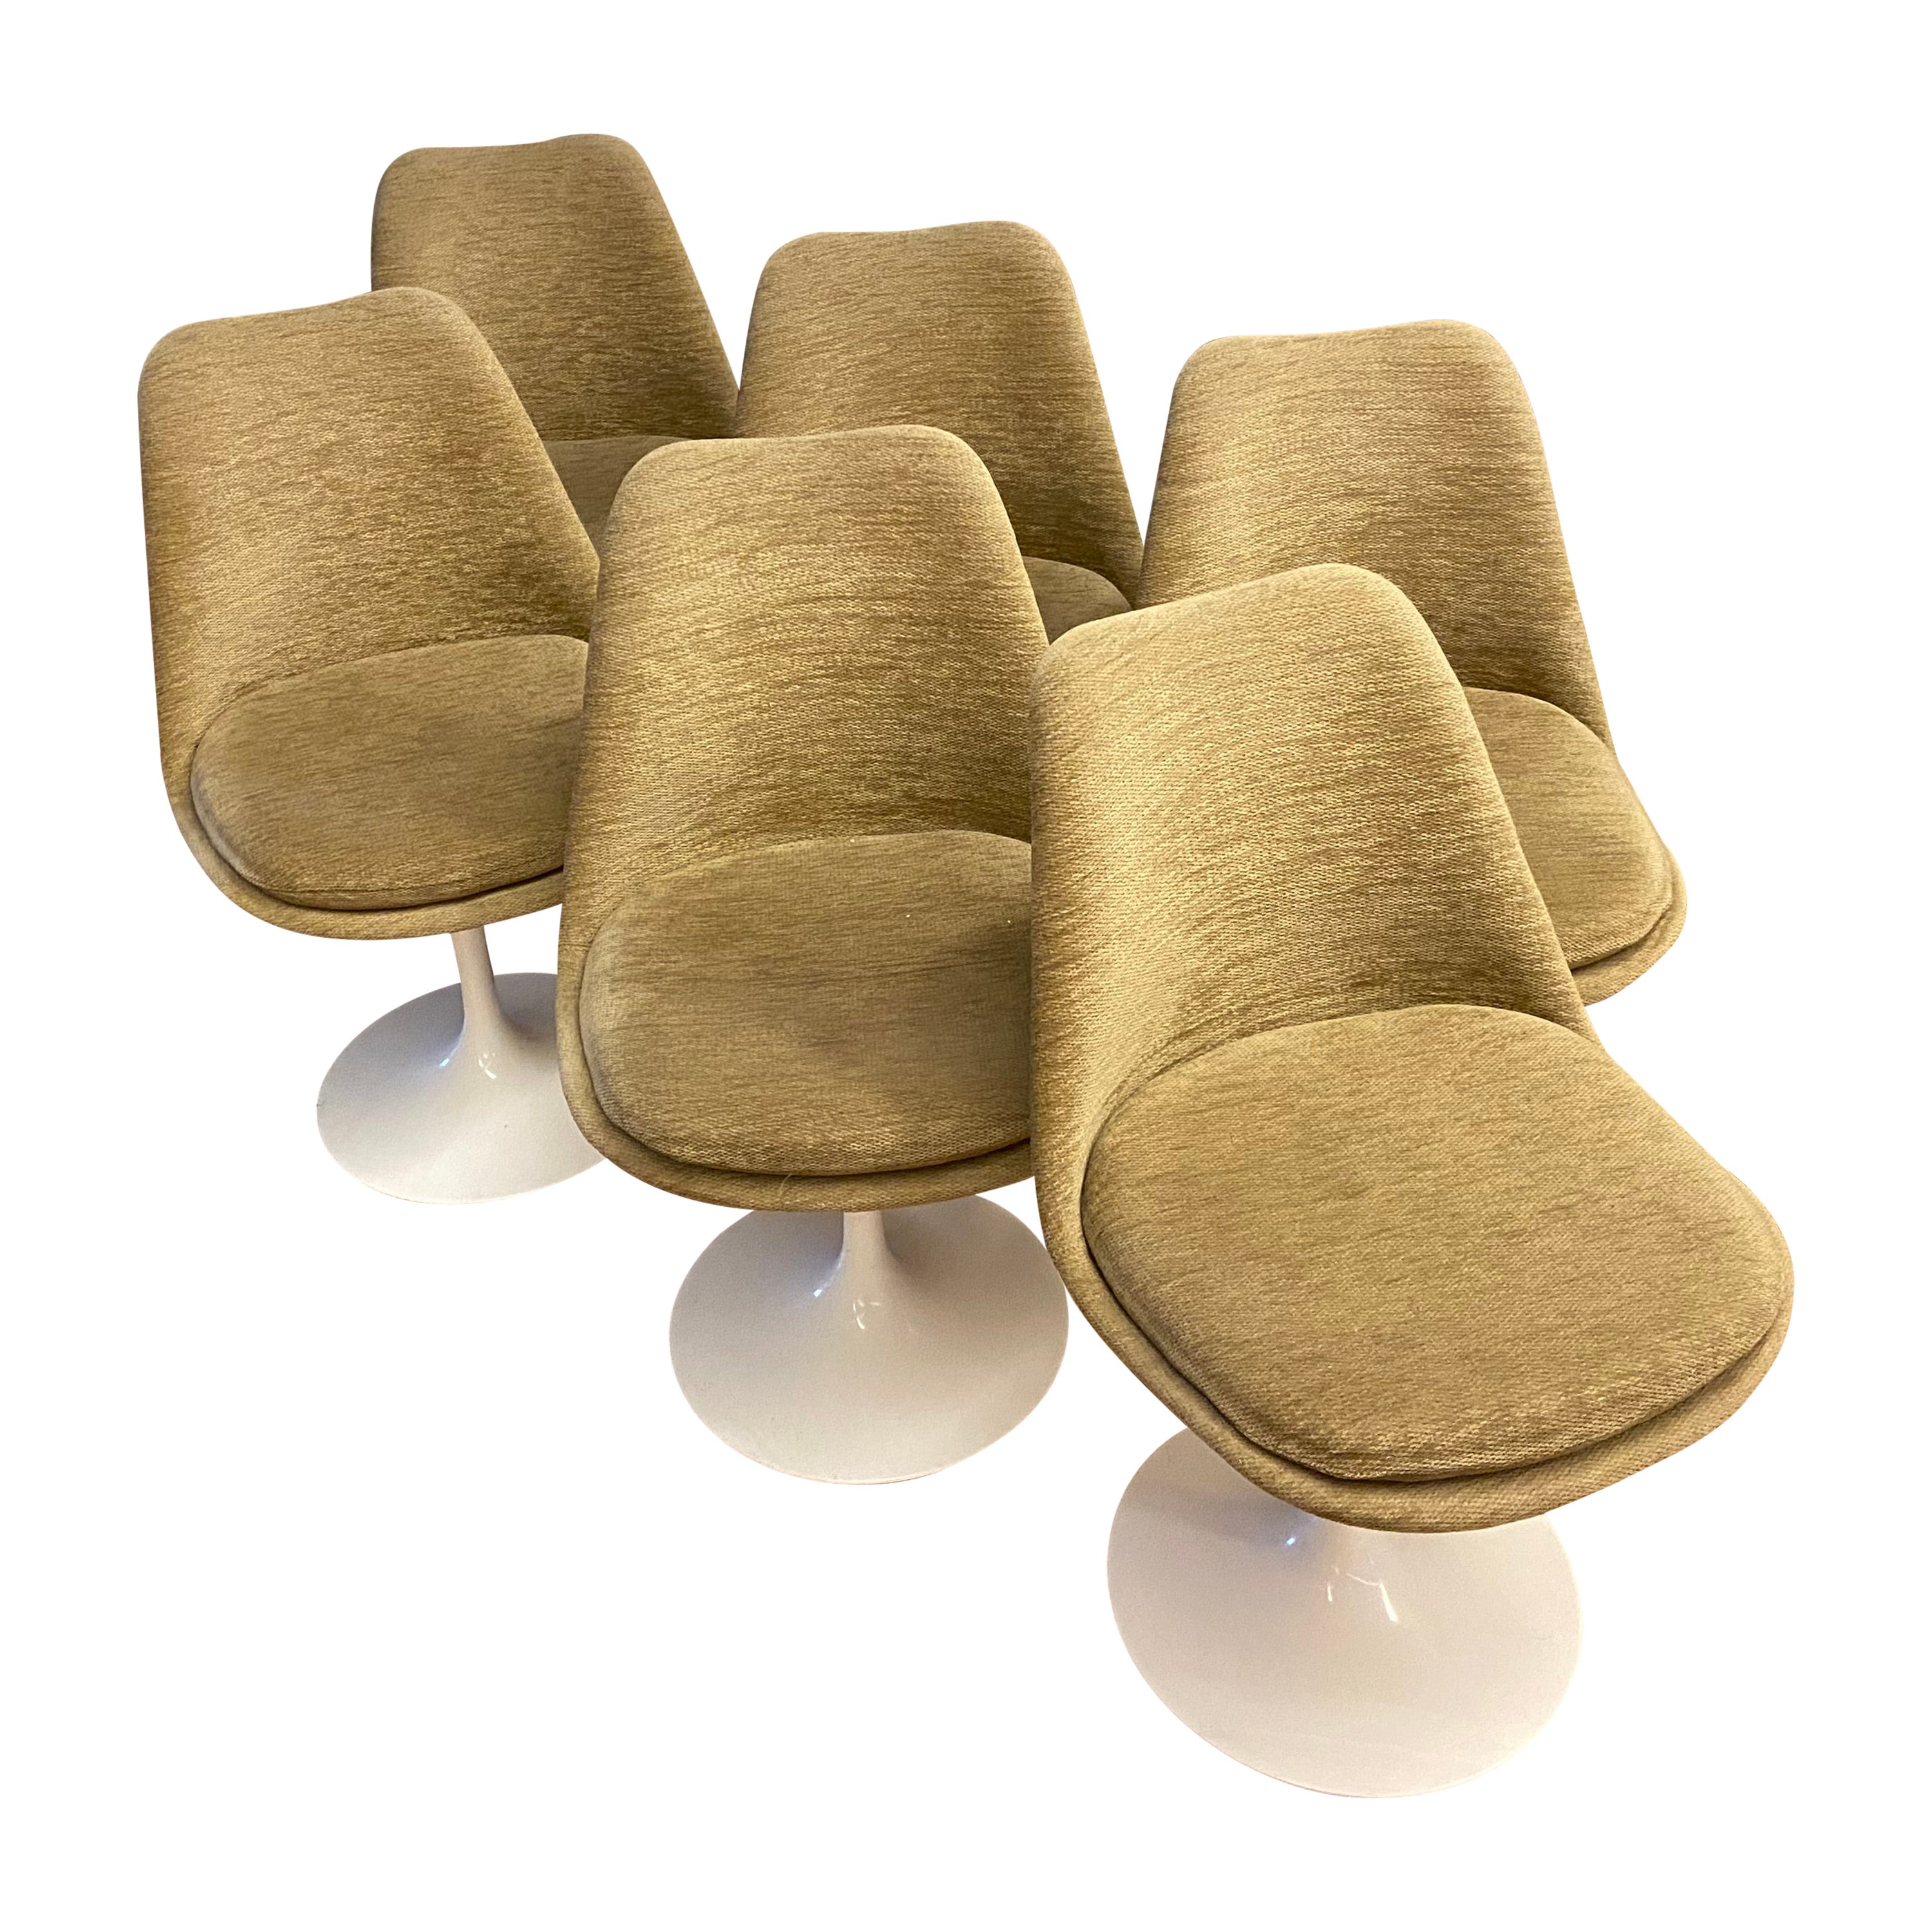 Set of white and green  6 "Tulip" chairs, Eero Saarinen, s. XX  Finland For Sale